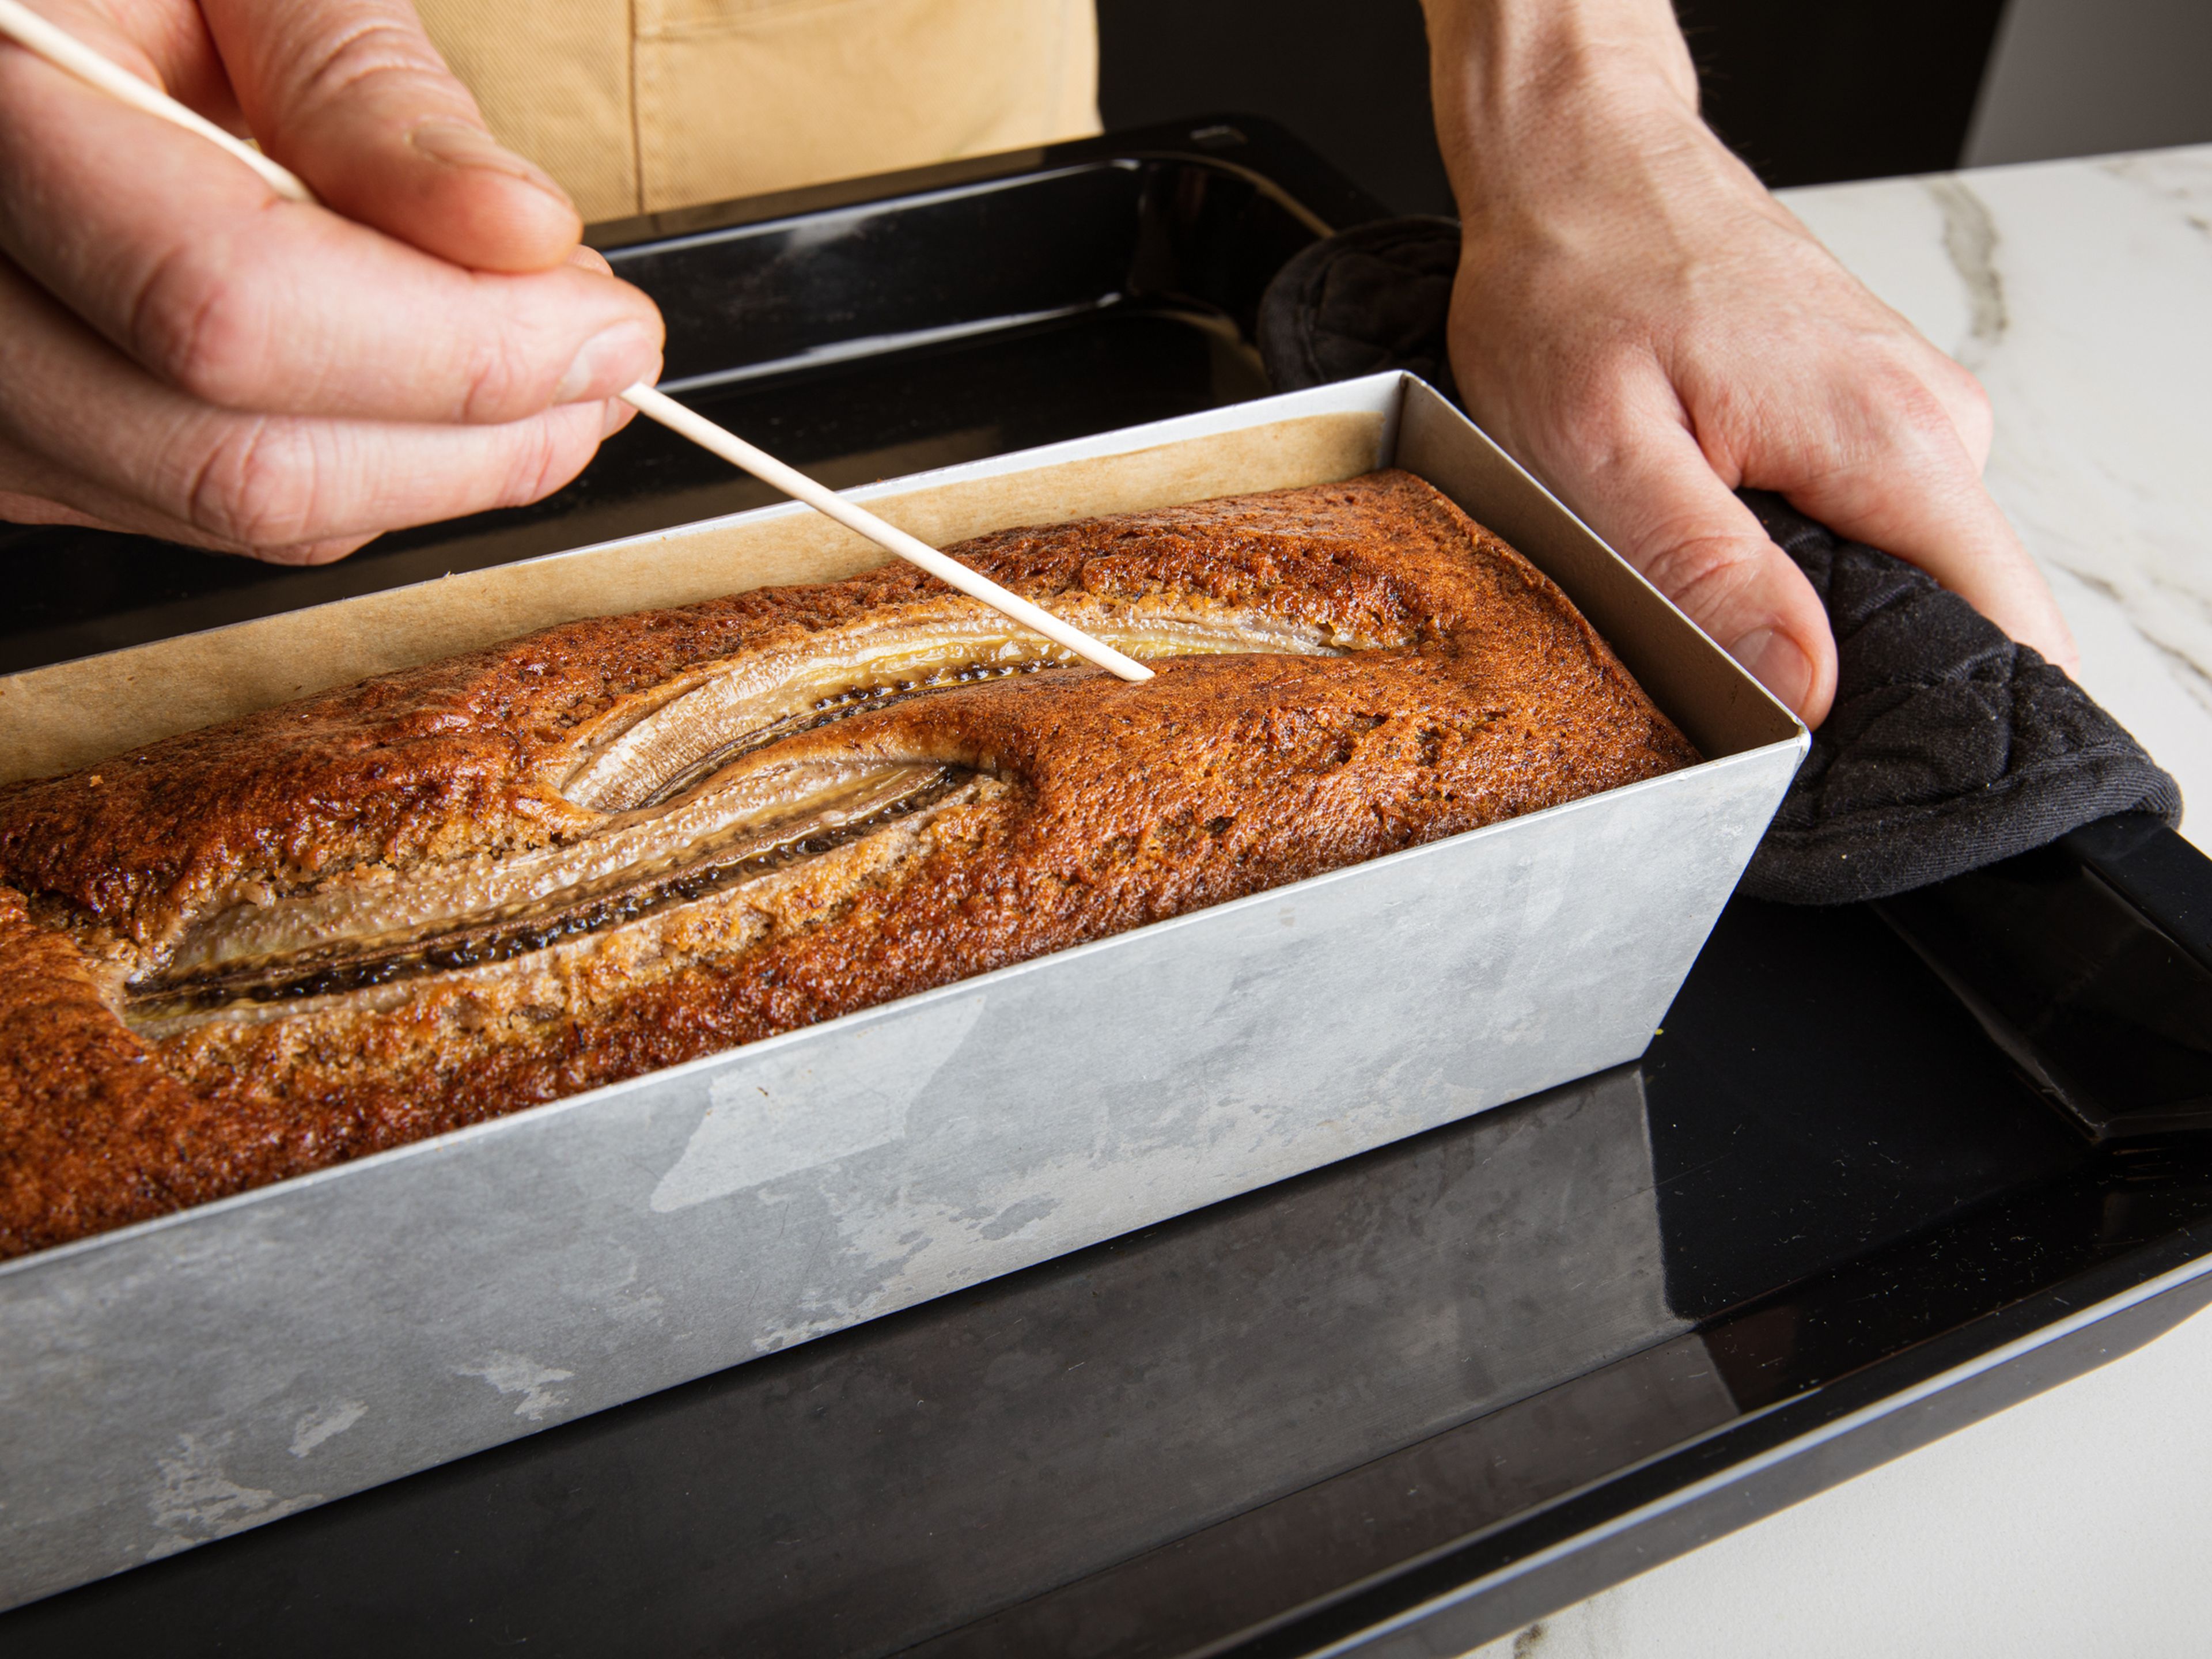 Bake the banana bread for approx. 60–80 min. To check whether it is ready, insert a toothpick or
wooden skewer into the center of the cake. If it comes out clean, the banana bread is ready. Leave
to rest for at least 15 min. before serving.